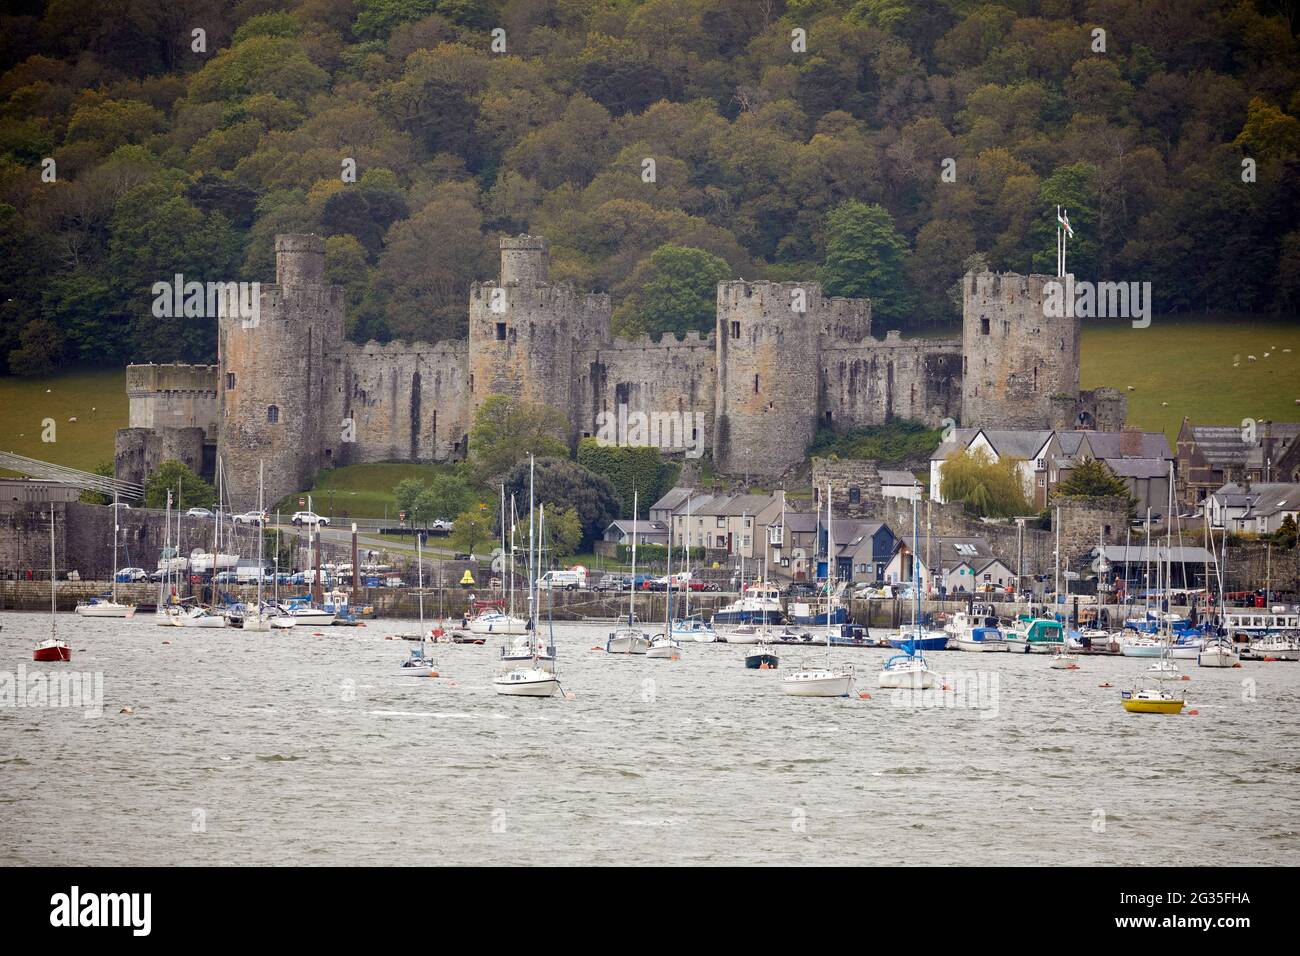 Conwy Castle fortification in Conwy, North Wales. seen from Deganwy across the `River Conwy into the quay area marina Stock Photo